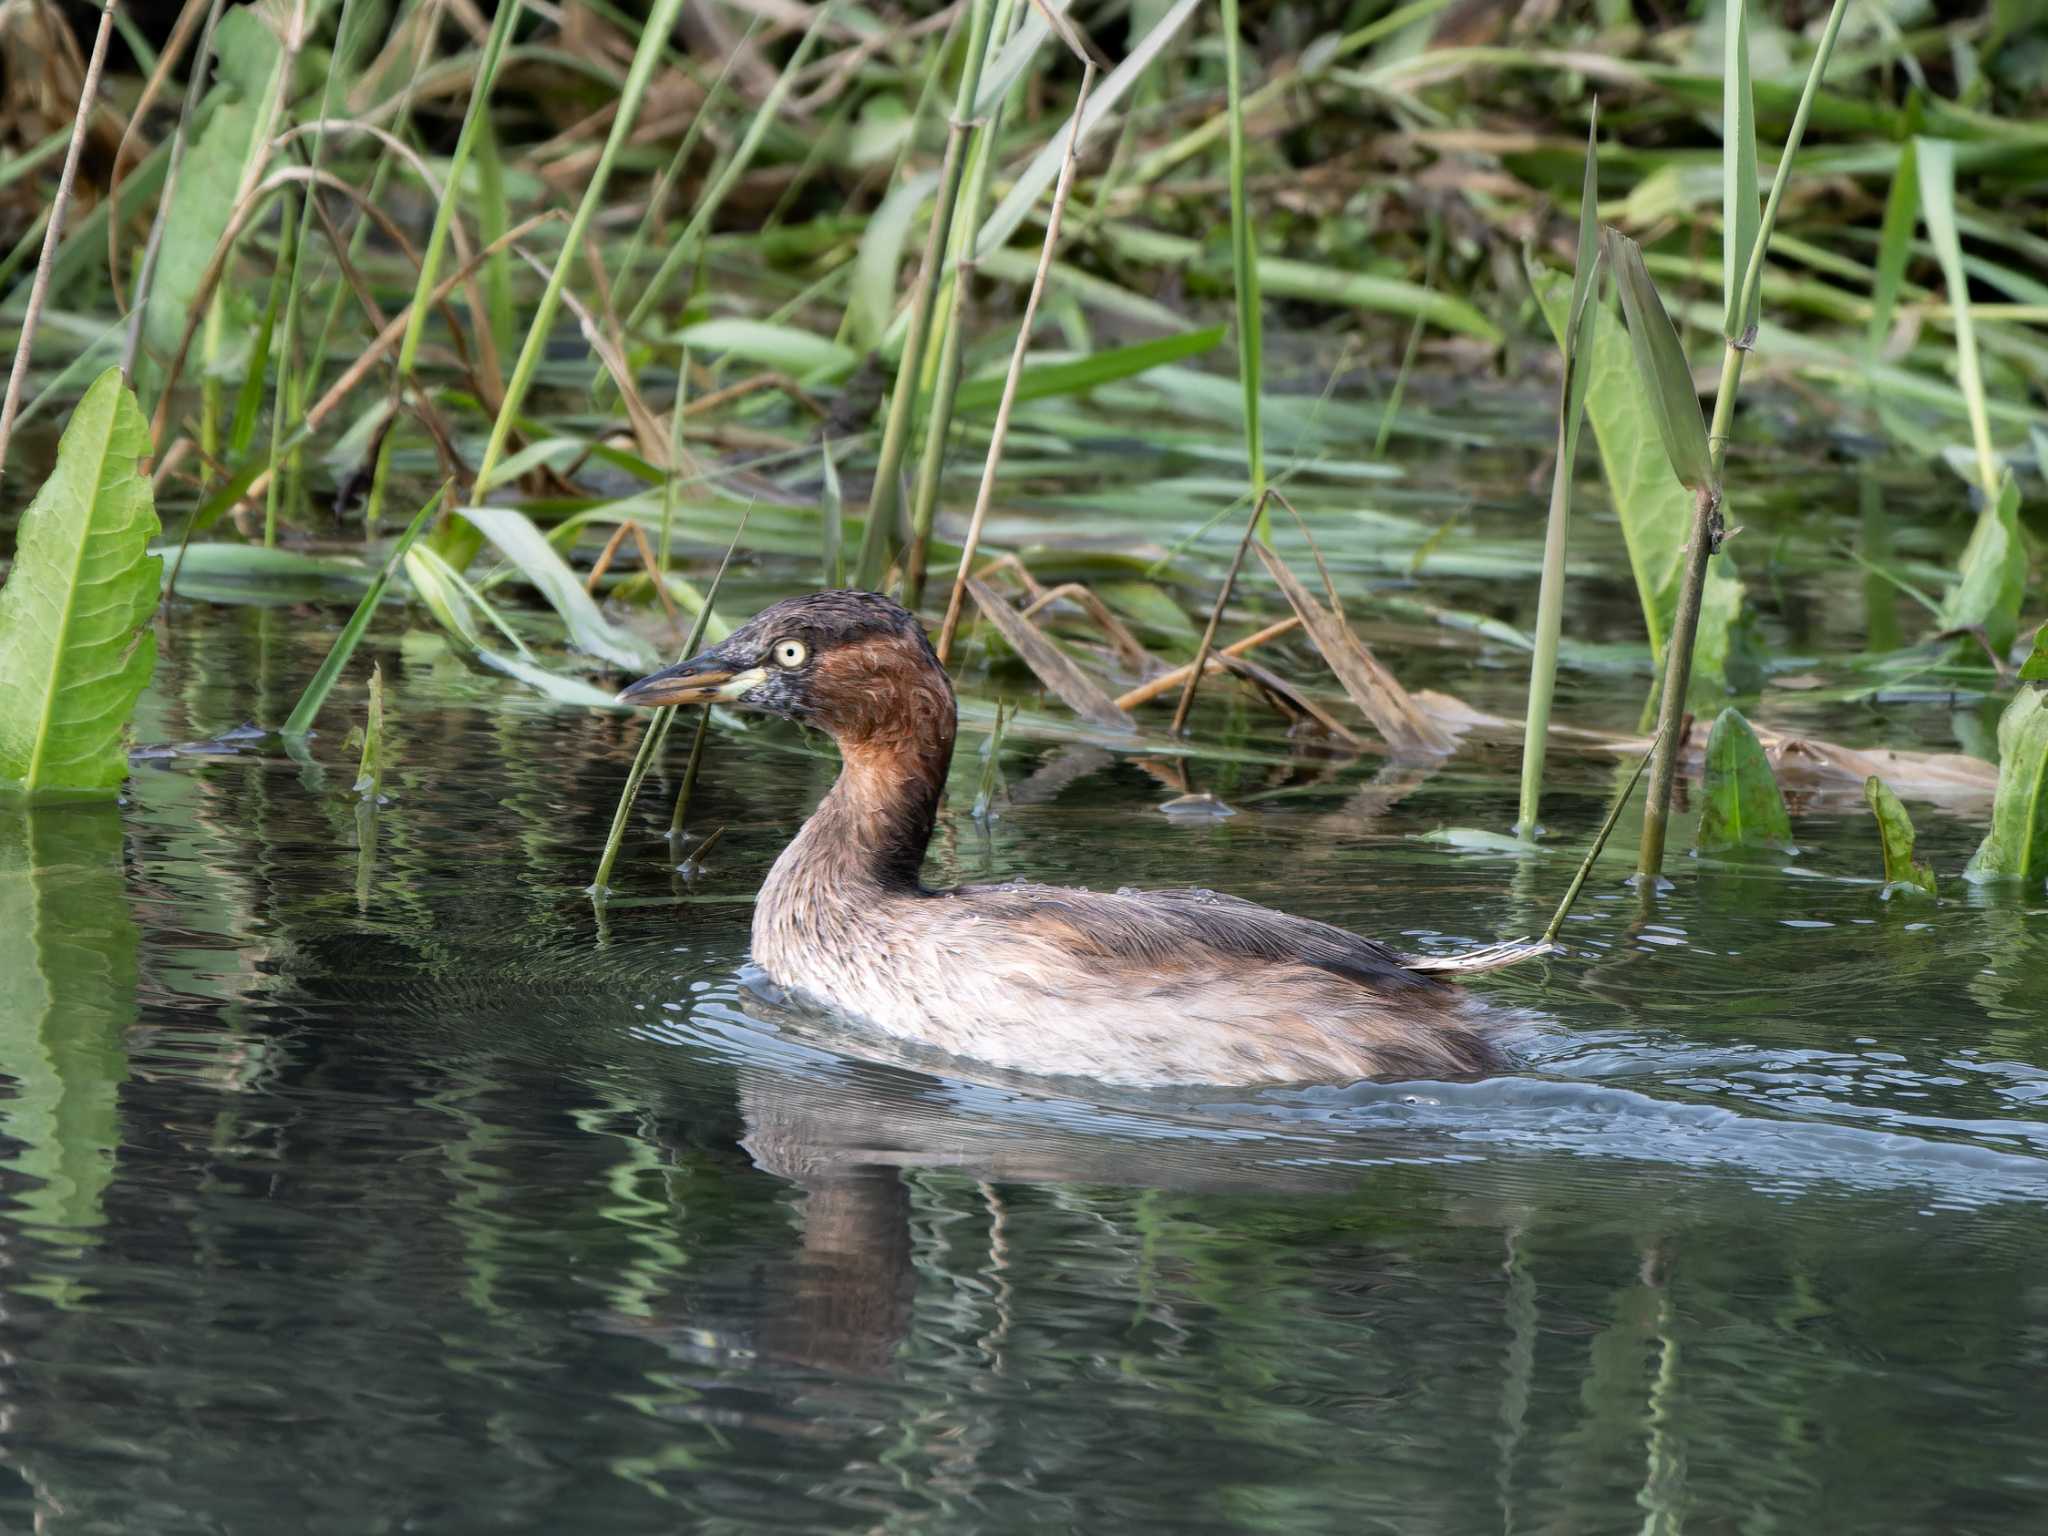 Photo of Little Grebe at 長崎県 by ここは長崎